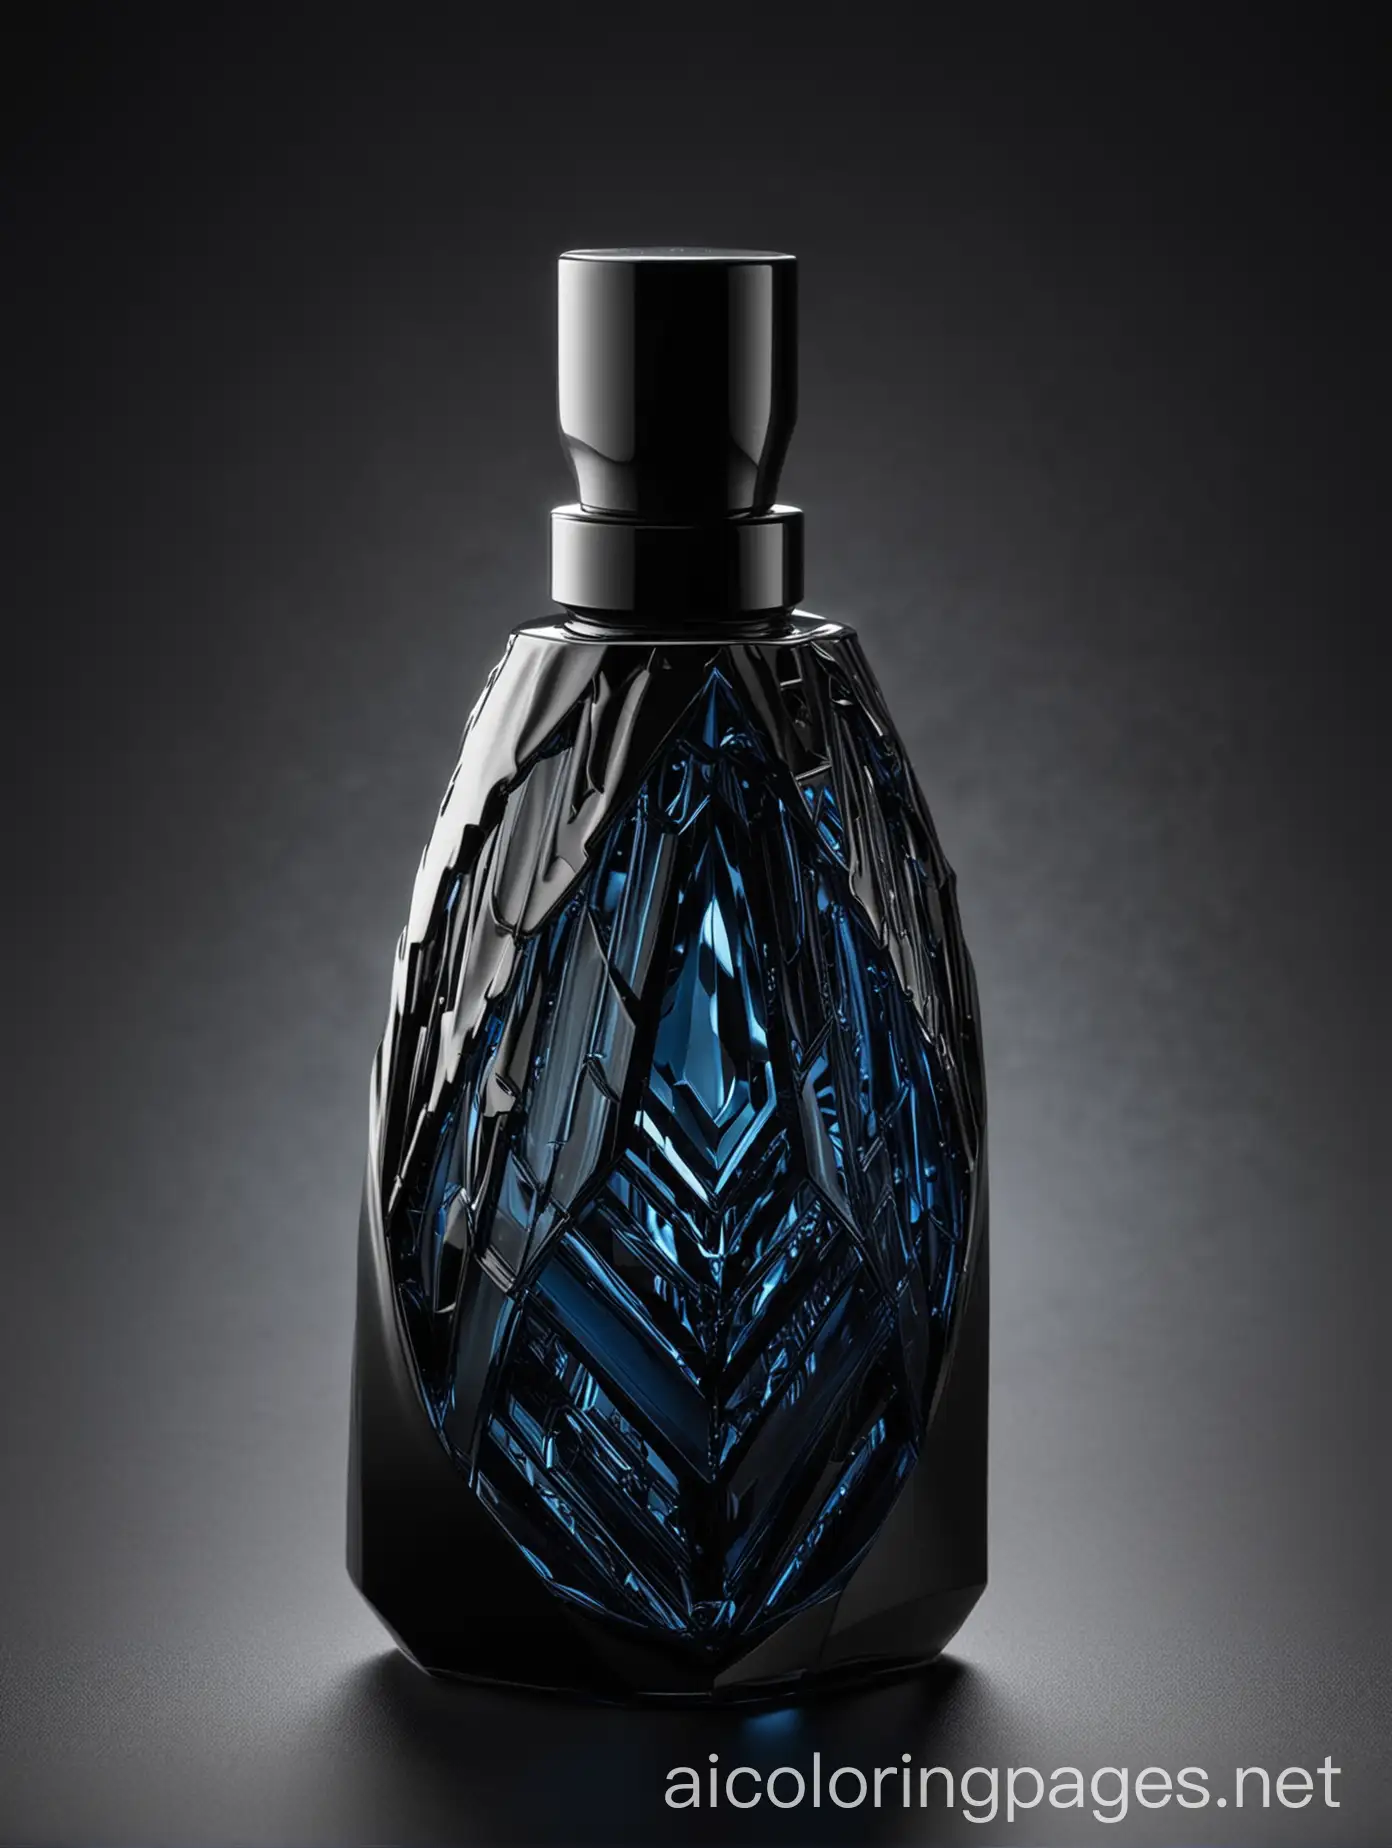 Design an image of a modern and eye-catching men's perfume bottle with a unique and striking appearance that grabs attention. The bottle should have a distinctive and unconventional design, such as a geometric shape or a futuristic design. It could be made of dark glass or colored with metallic hues like glossy black or dark blue with silver or chrome accents. The cap should have an innovative design and perhaps feature intricate metallic details.nPlace the bottle on a dark, elegant background with lighting that highlights its details and geometric shapes. You can add visual effects like a light beam or a subtle mist around the bottle to give it a magical and mysterious touch. Include surrounding elements such as metal pieces or neon lights to emphasize the bottle's modern and bold character.